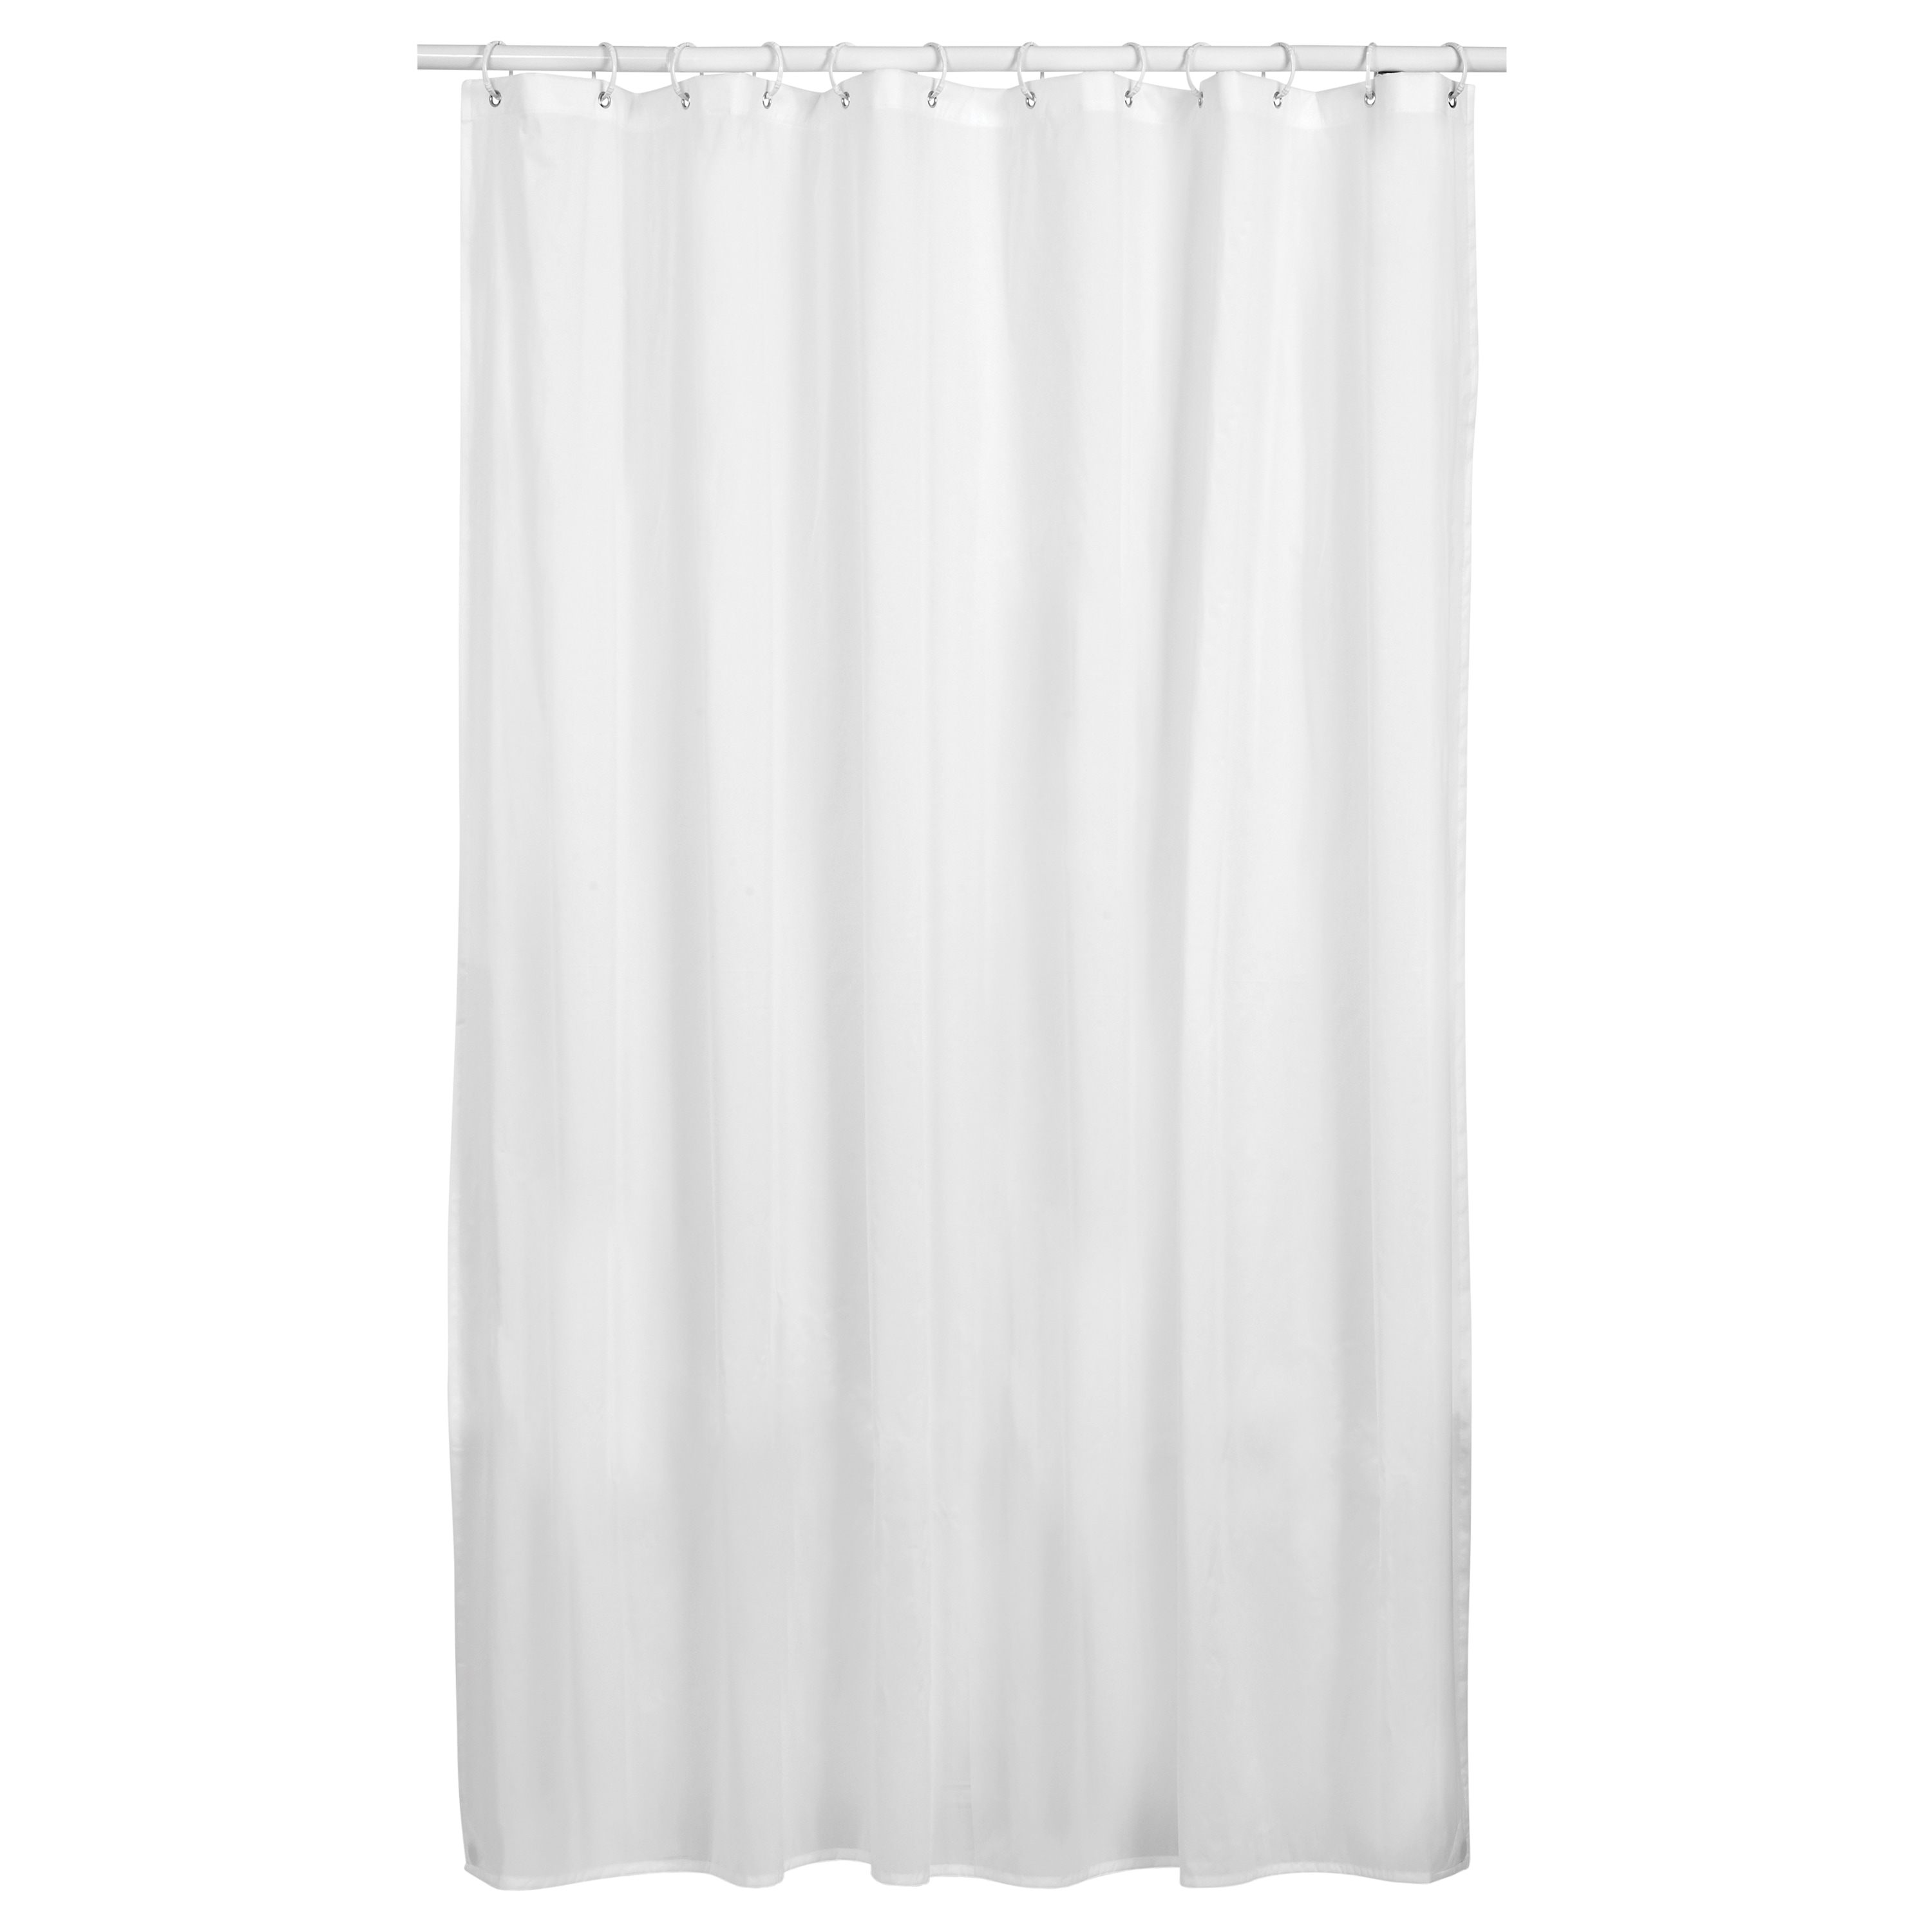 White Polyester Fabric Shower Curtain Liner with Microban Soft 70" x 72" 